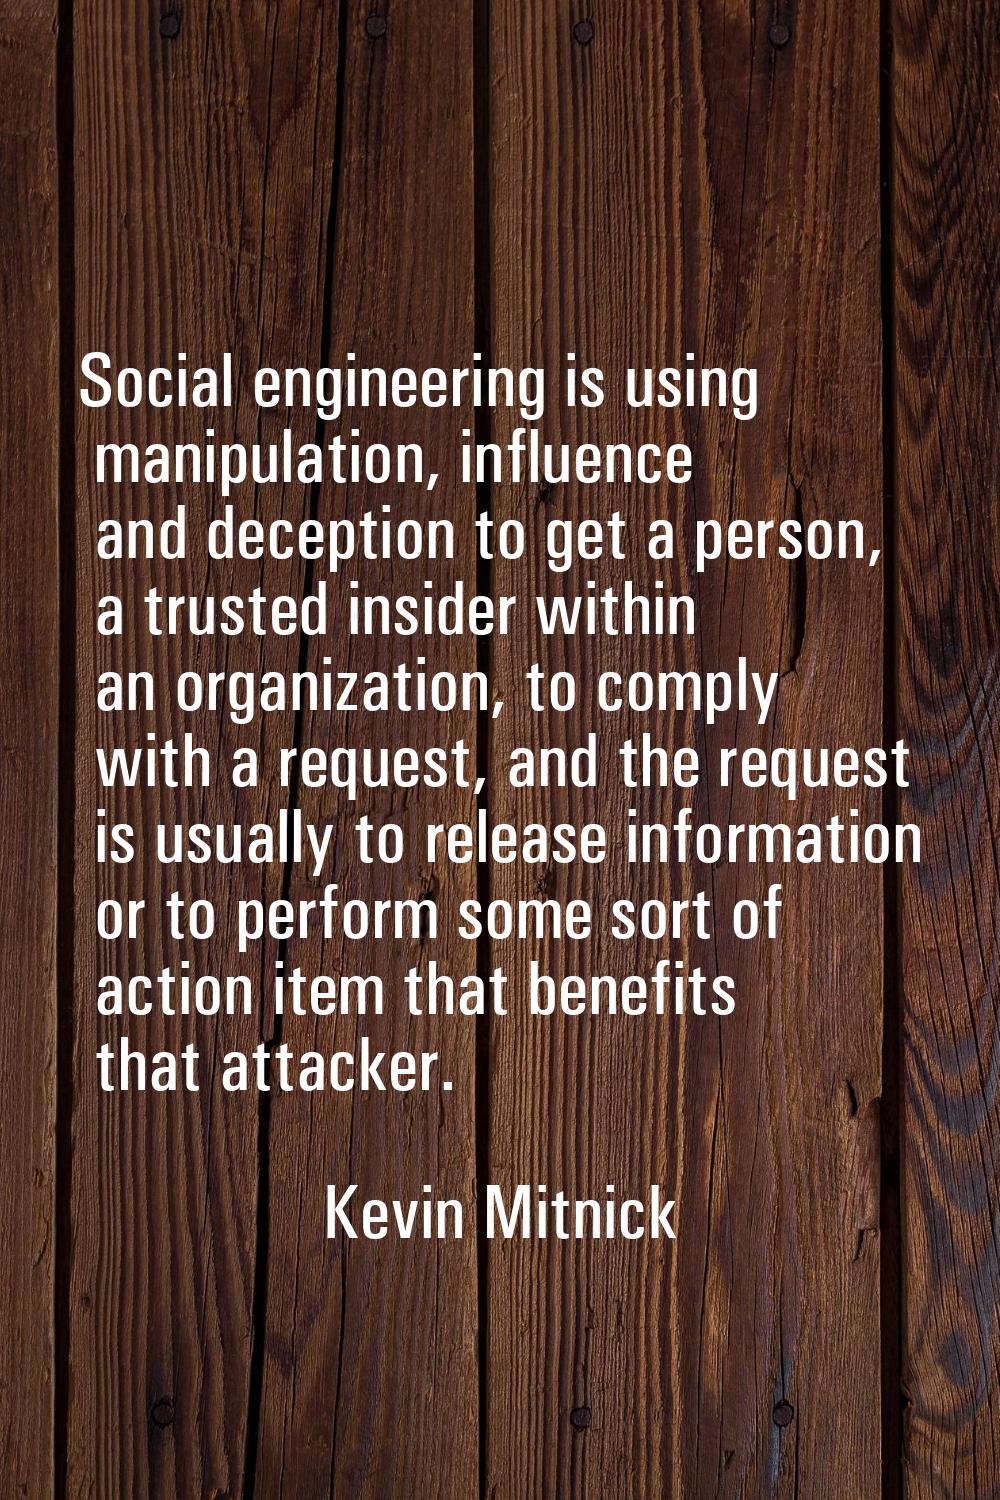 Social engineering is using manipulation, influence and deception to get a person, a trusted inside